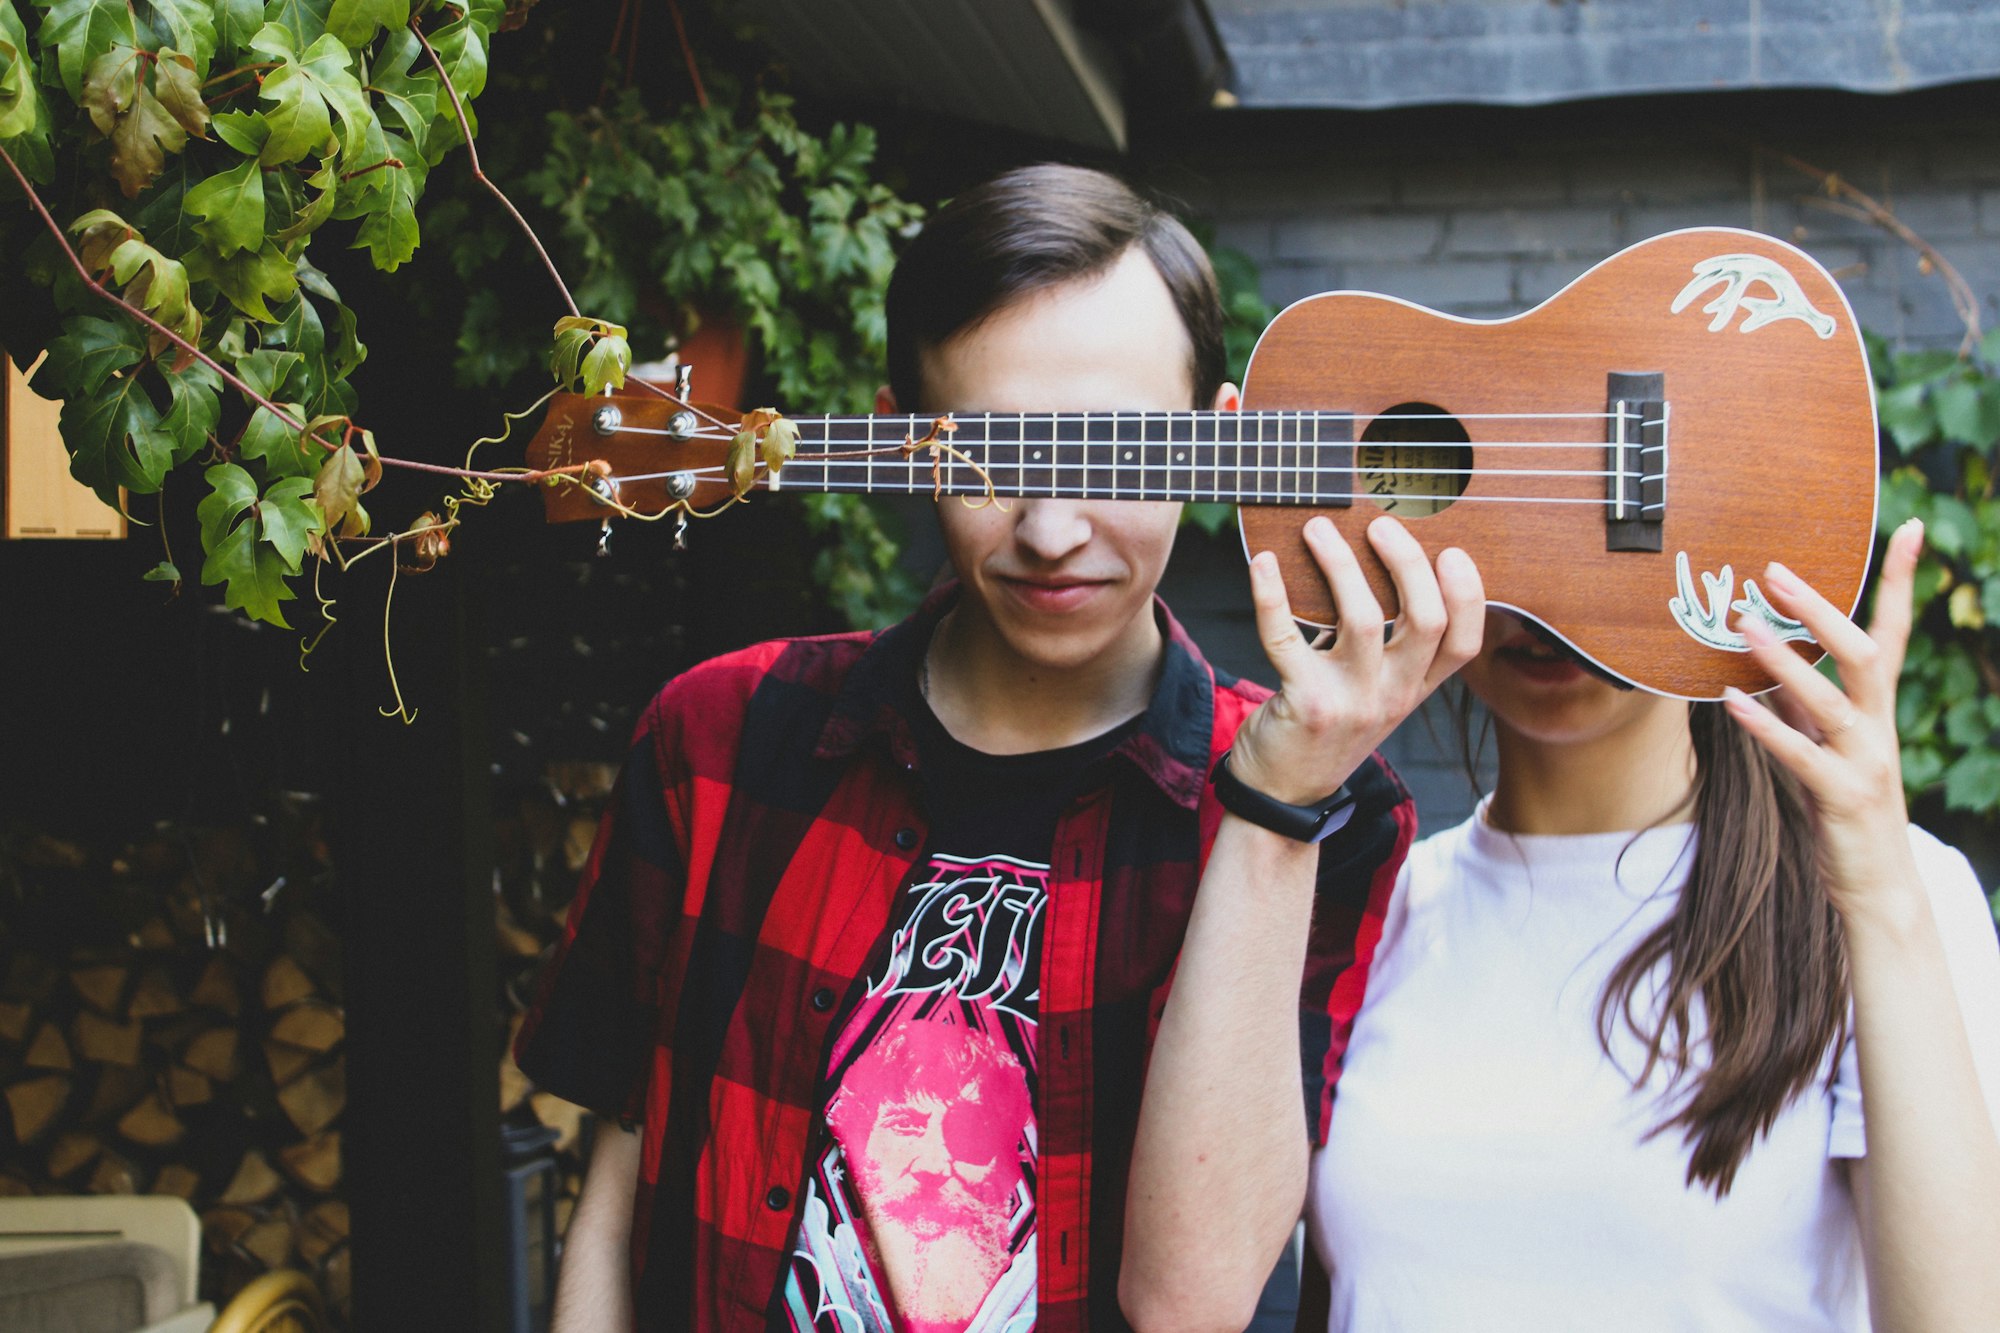 7 Easy Songs to Play on a Ukulele